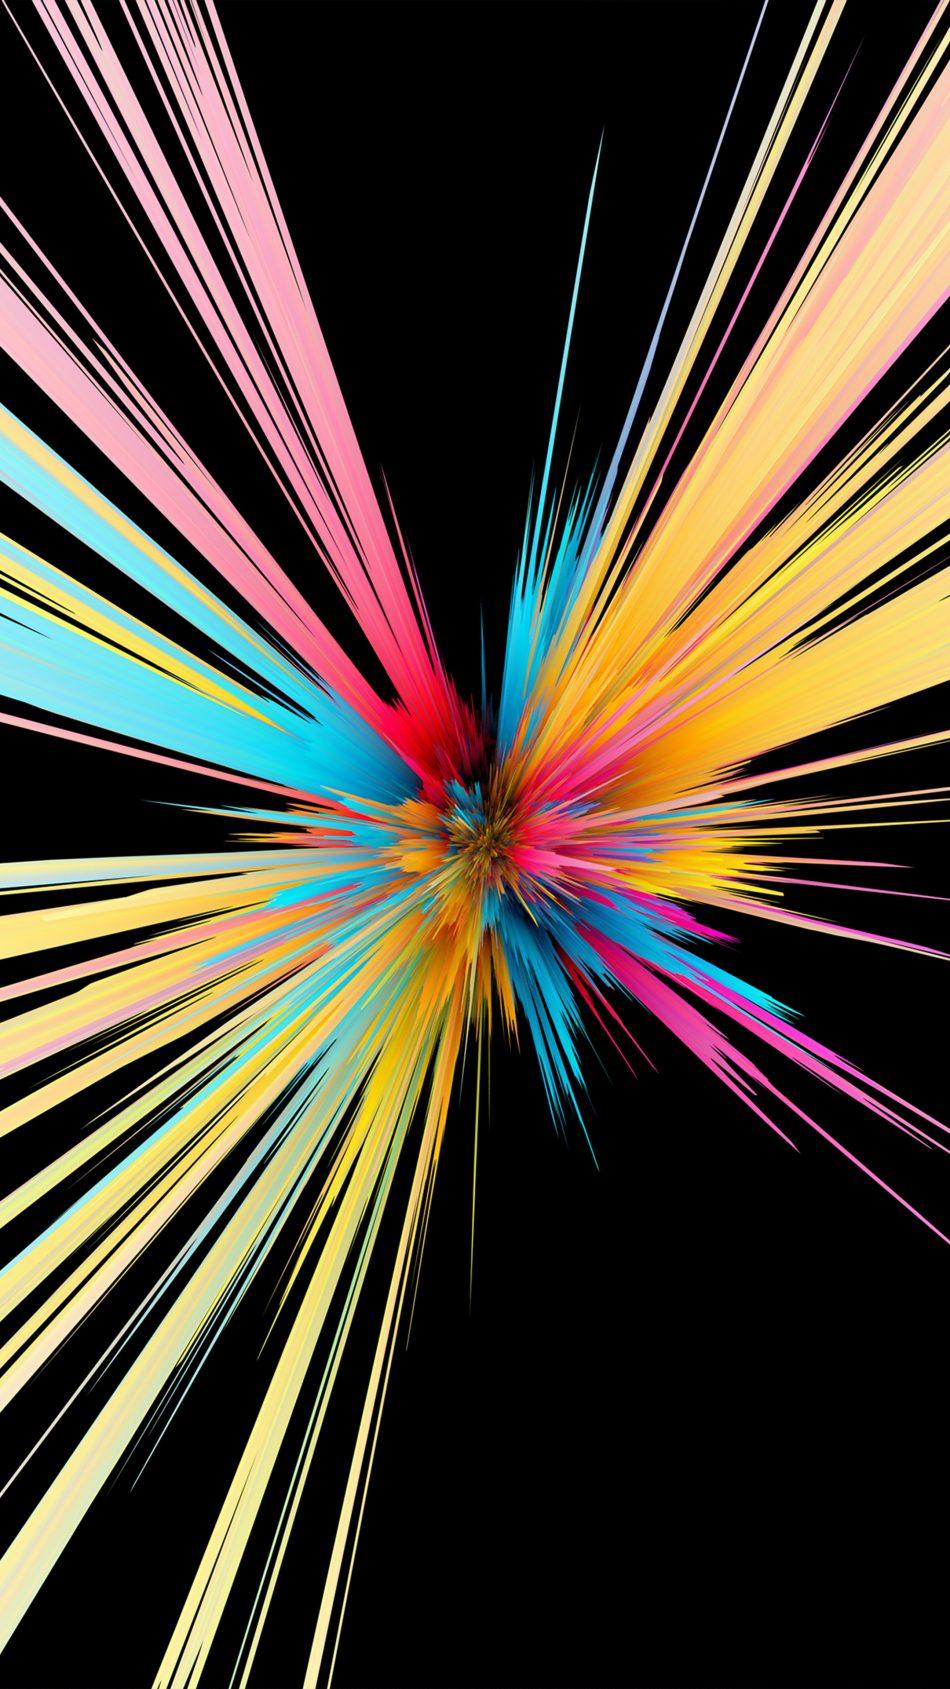 Colorful Particles Explosion Black Background Free 4K Ultra